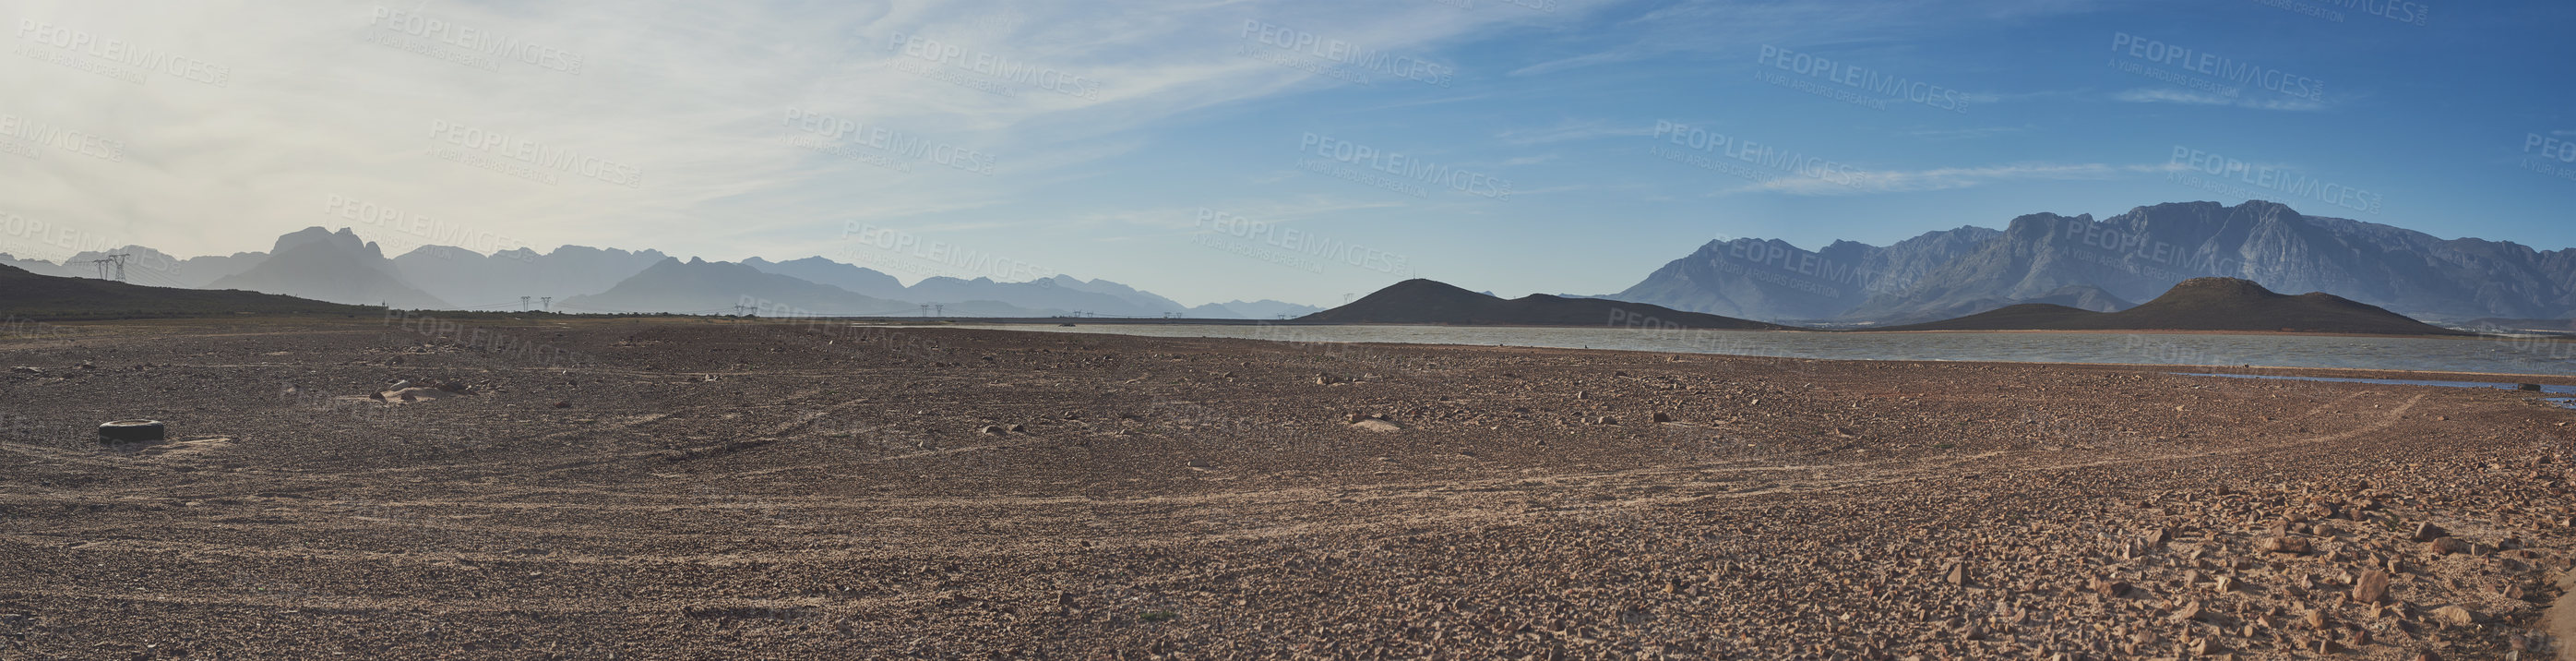 Buy stock photo Shot of a desolate landscape during the day with a small dried out dam in the middle with the words 